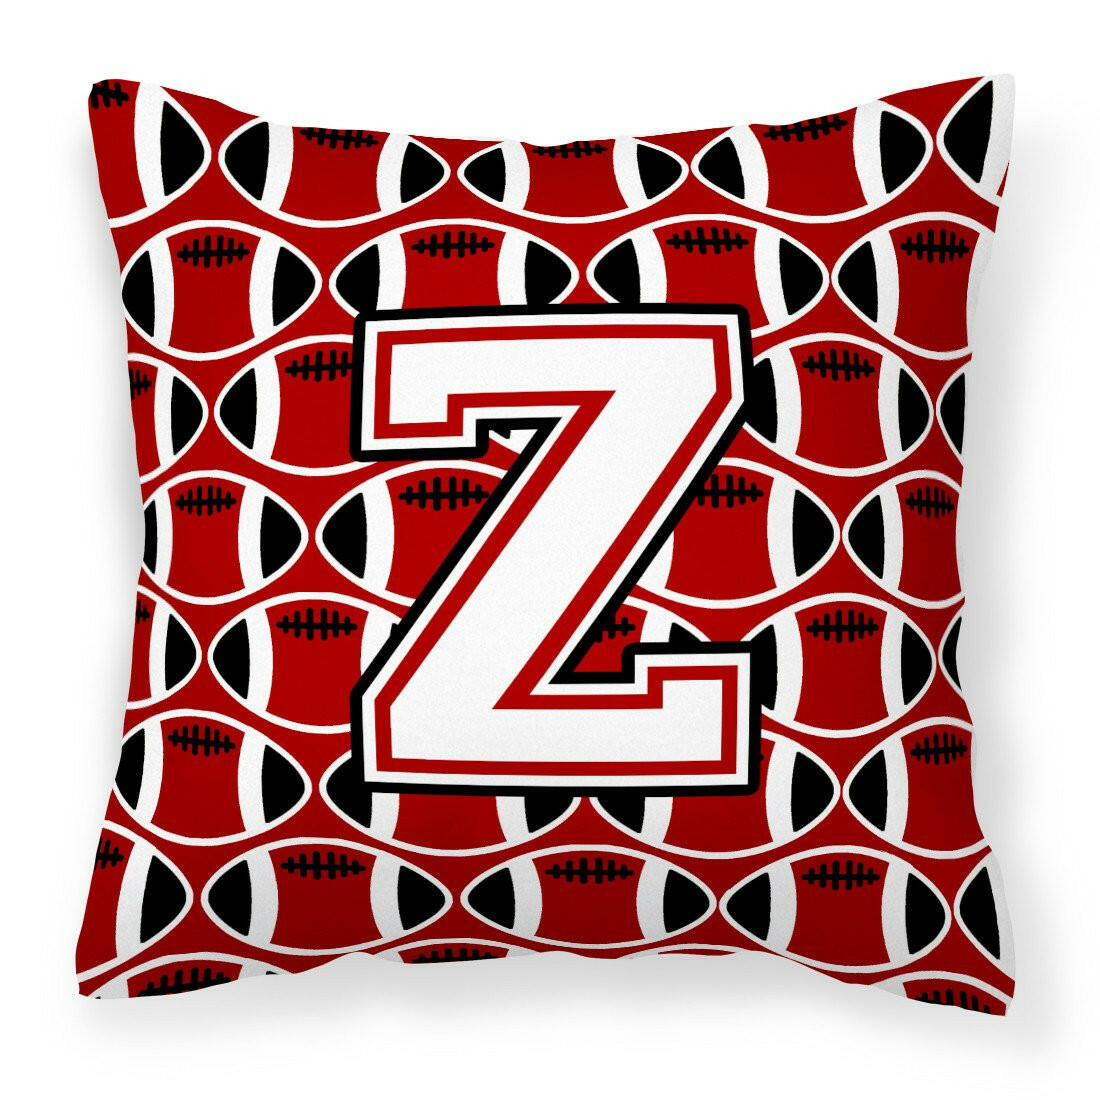 Letter Z Football Cardinal and White Fabric Decorative Pillow CJ1082-ZPW1414 by Caroline's Treasures